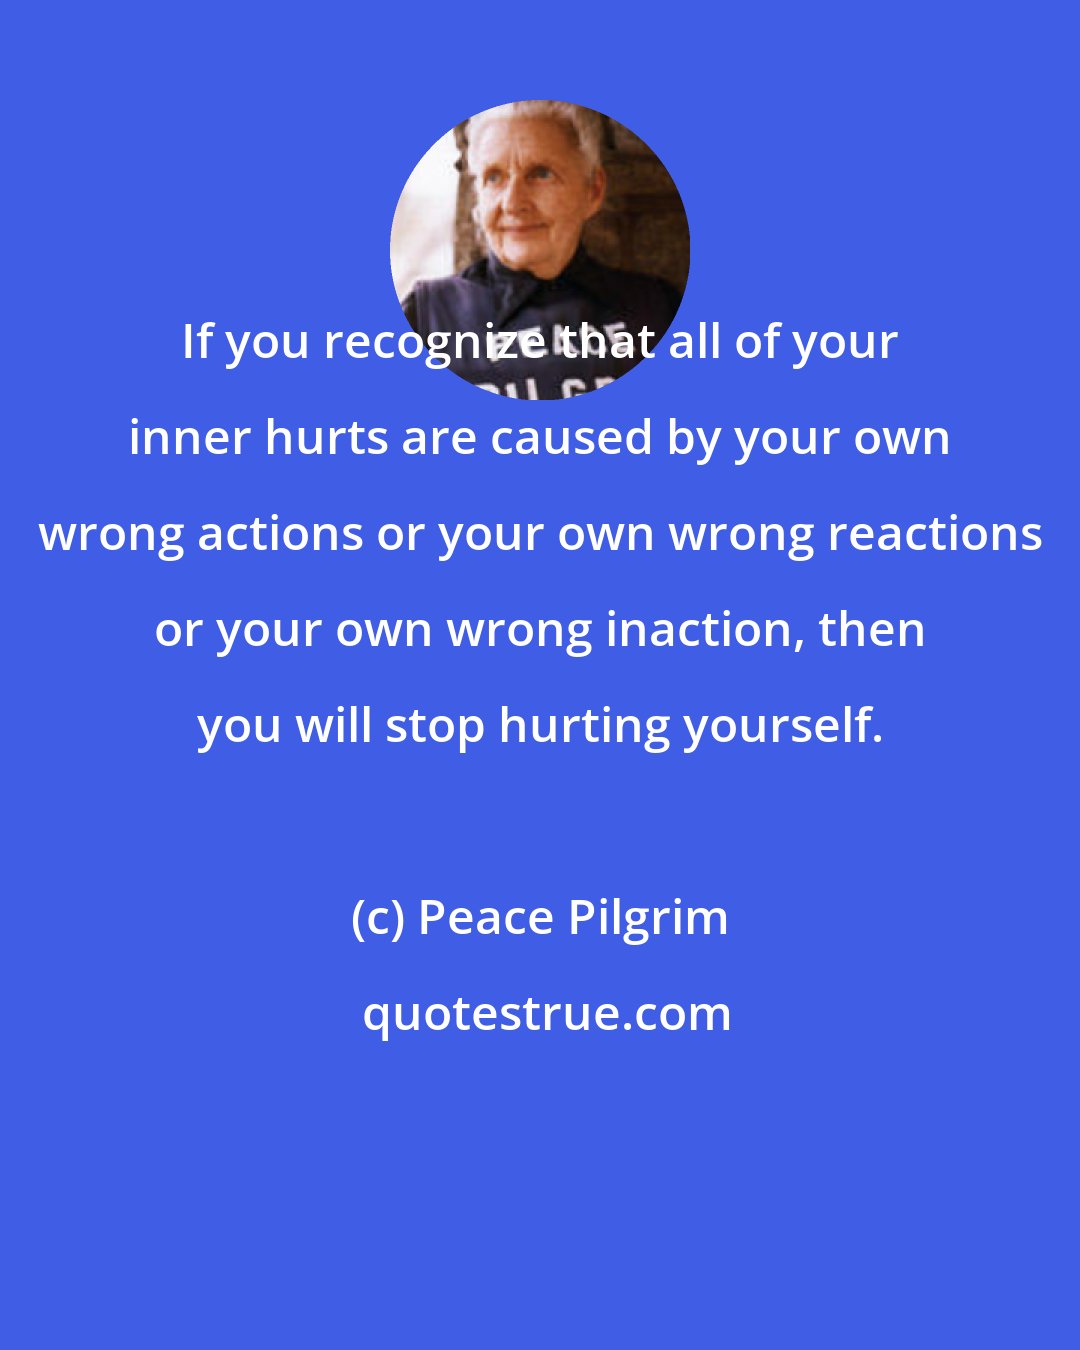 Peace Pilgrim: If you recognize that all of your inner hurts are caused by your own wrong actions or your own wrong reactions or your own wrong inaction, then you will stop hurting yourself.